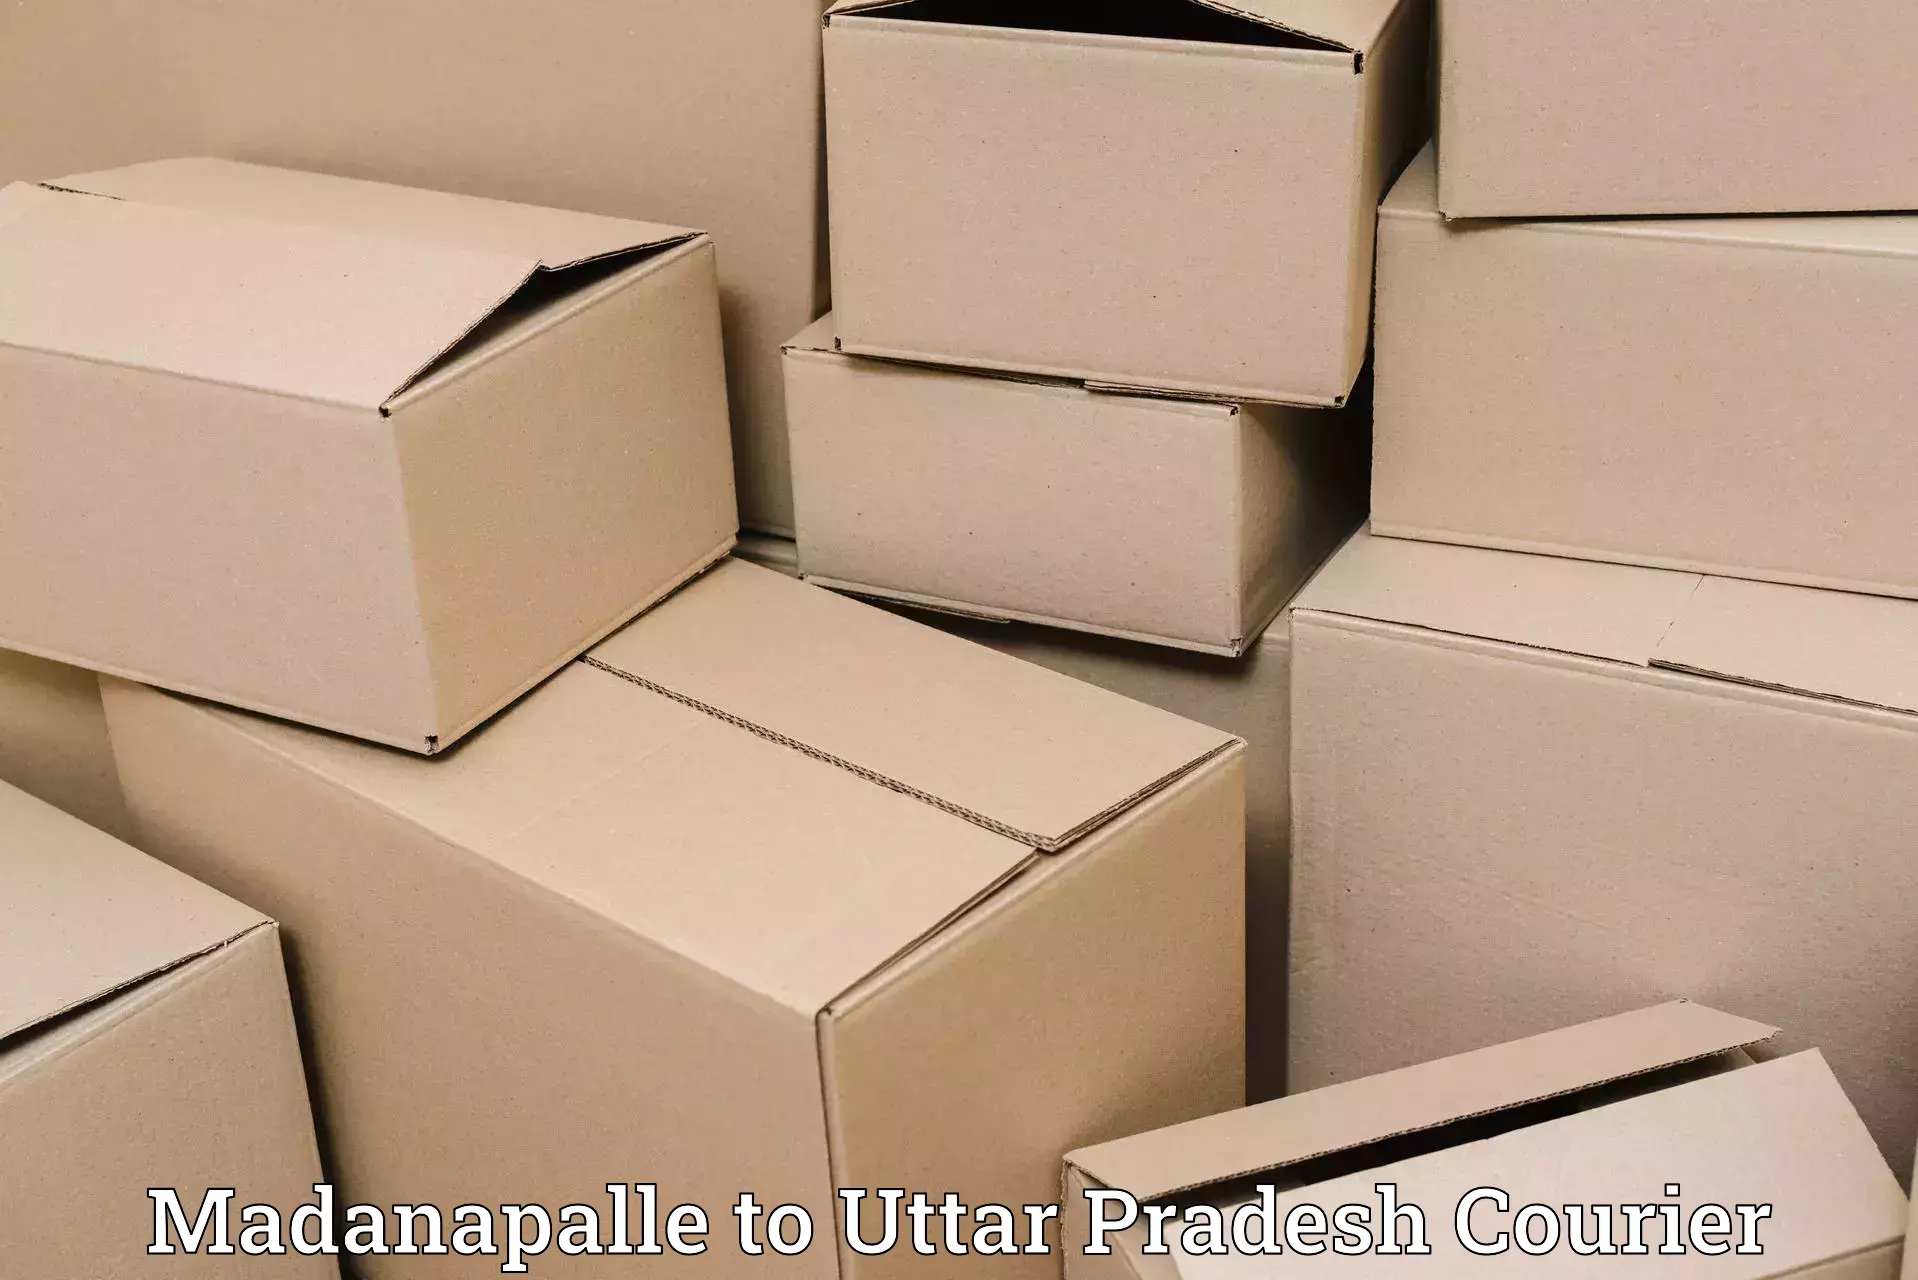 Seamless shipping experience Madanapalle to Tilhar